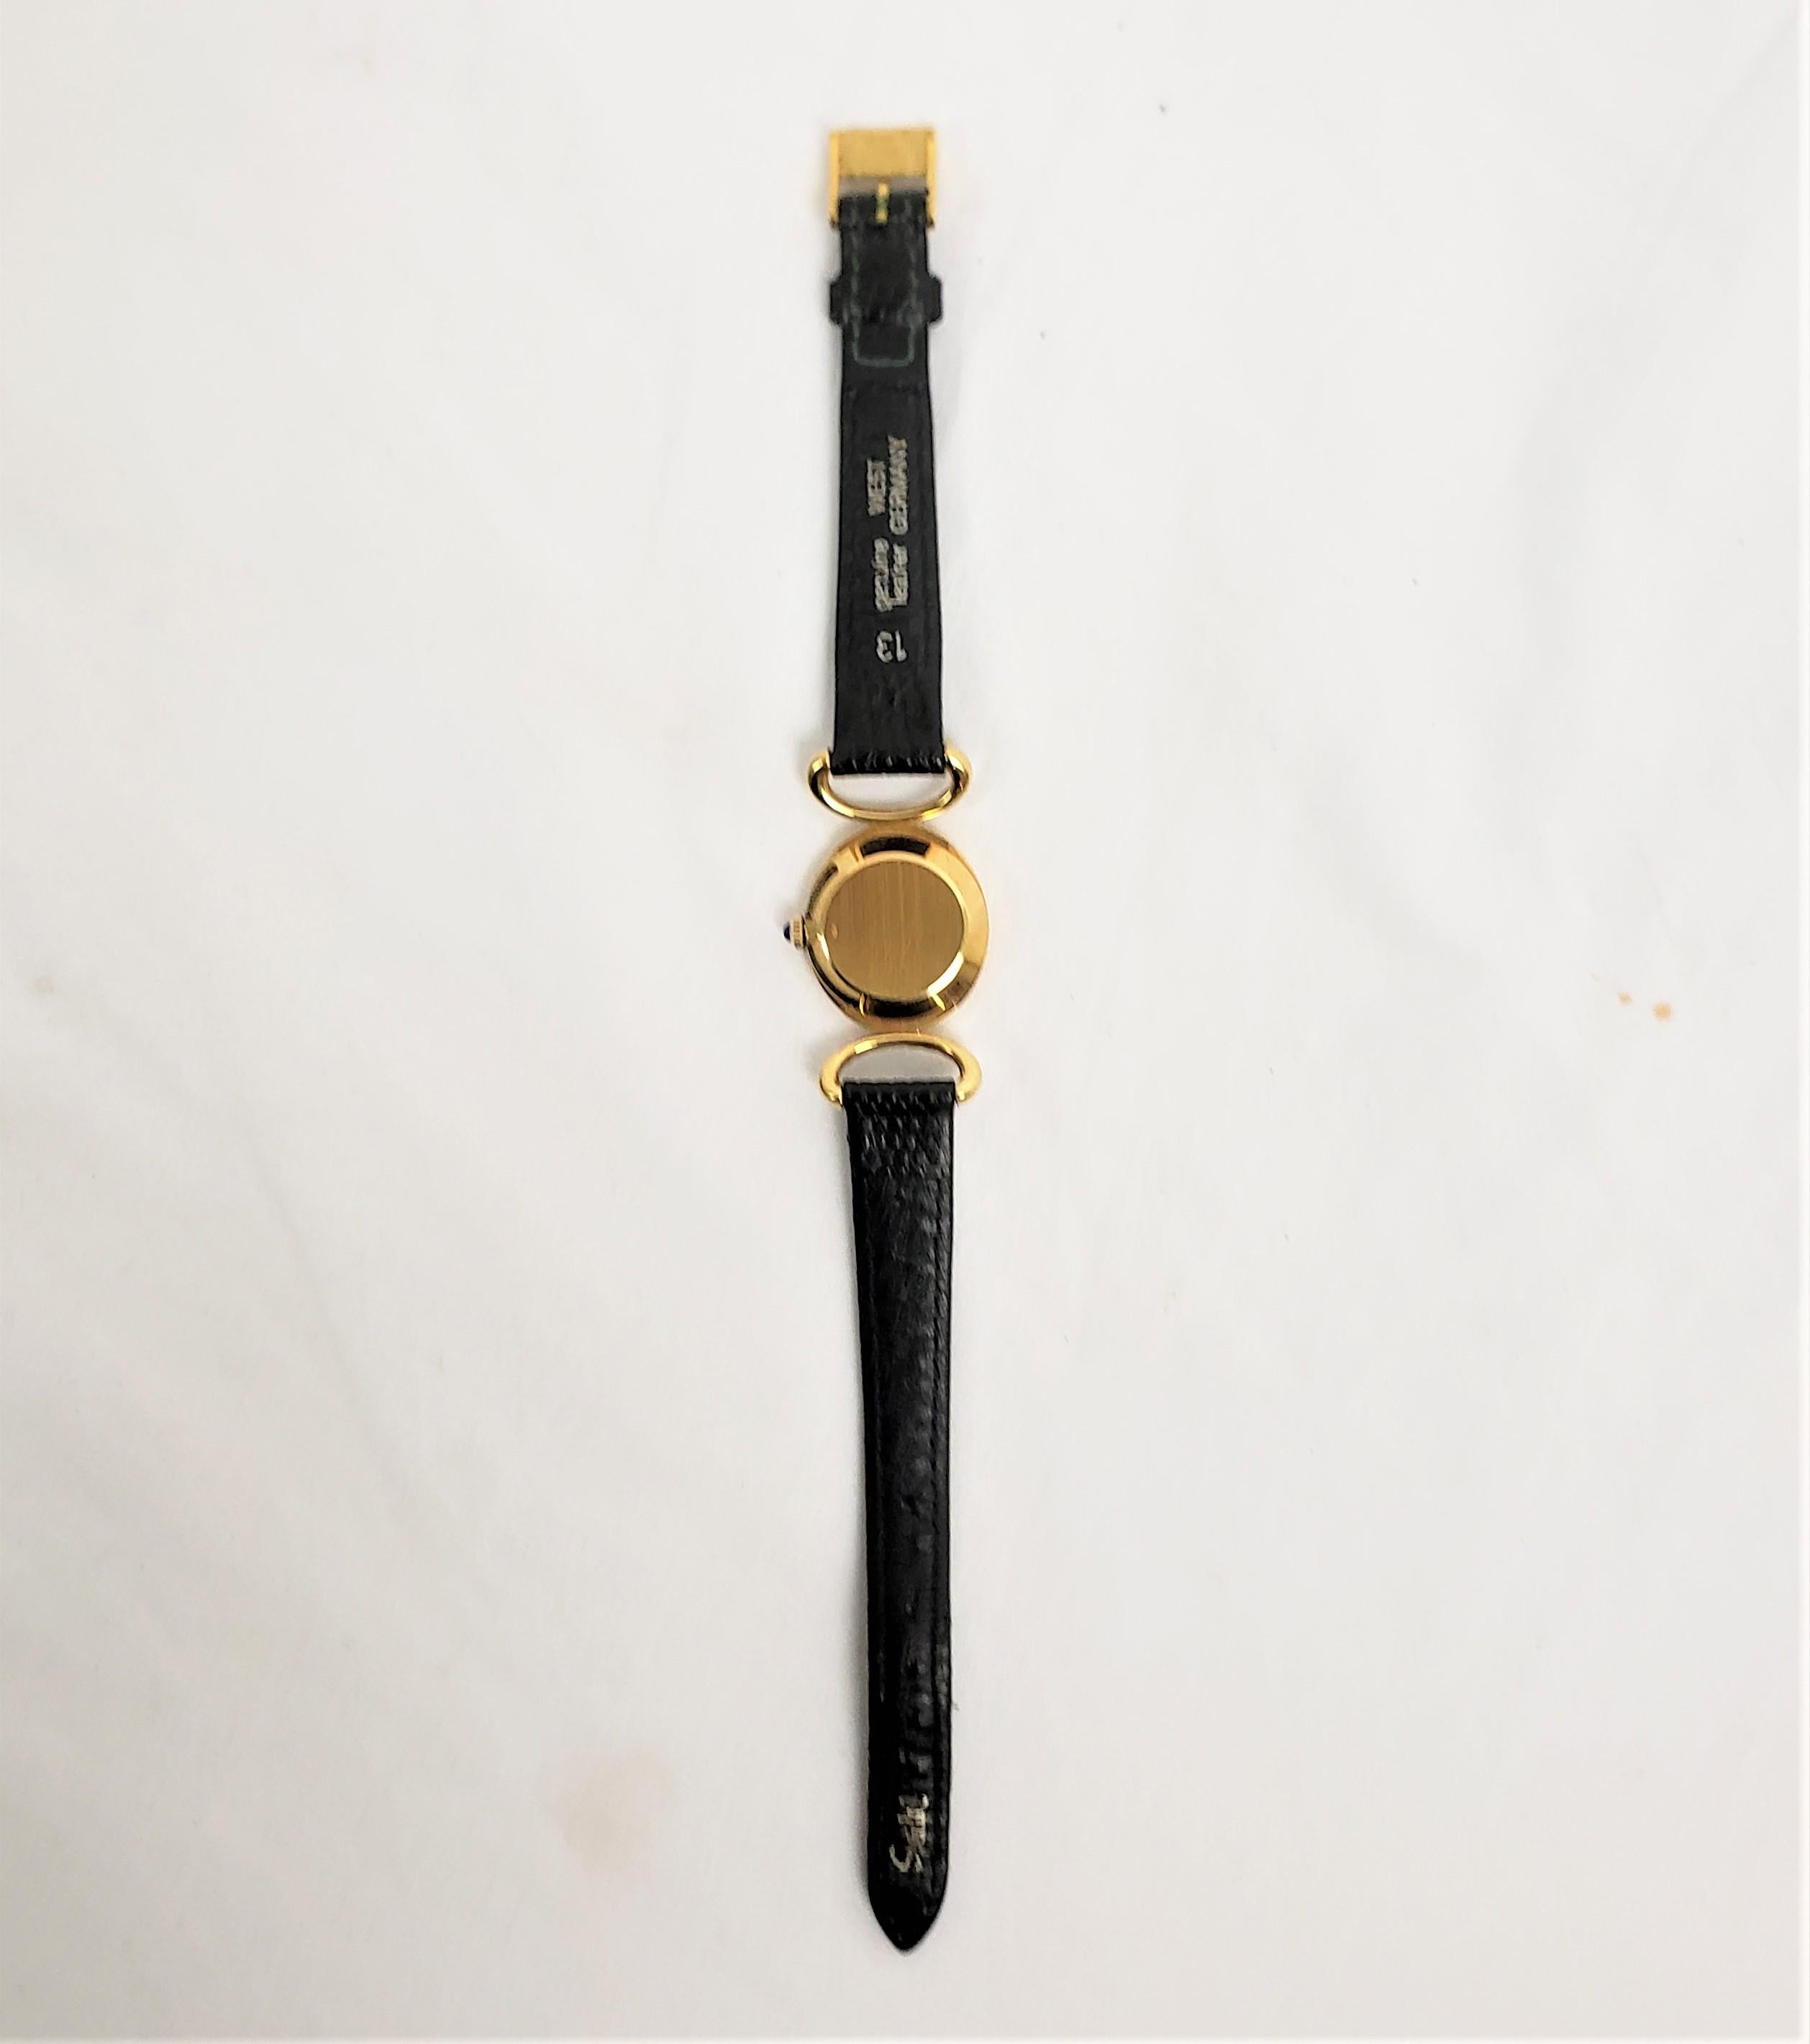 Baume Mercier 18 Karat Yellow Gold Ladies Wristwatch with Original Leather Band In Good Condition For Sale In Hamilton, Ontario